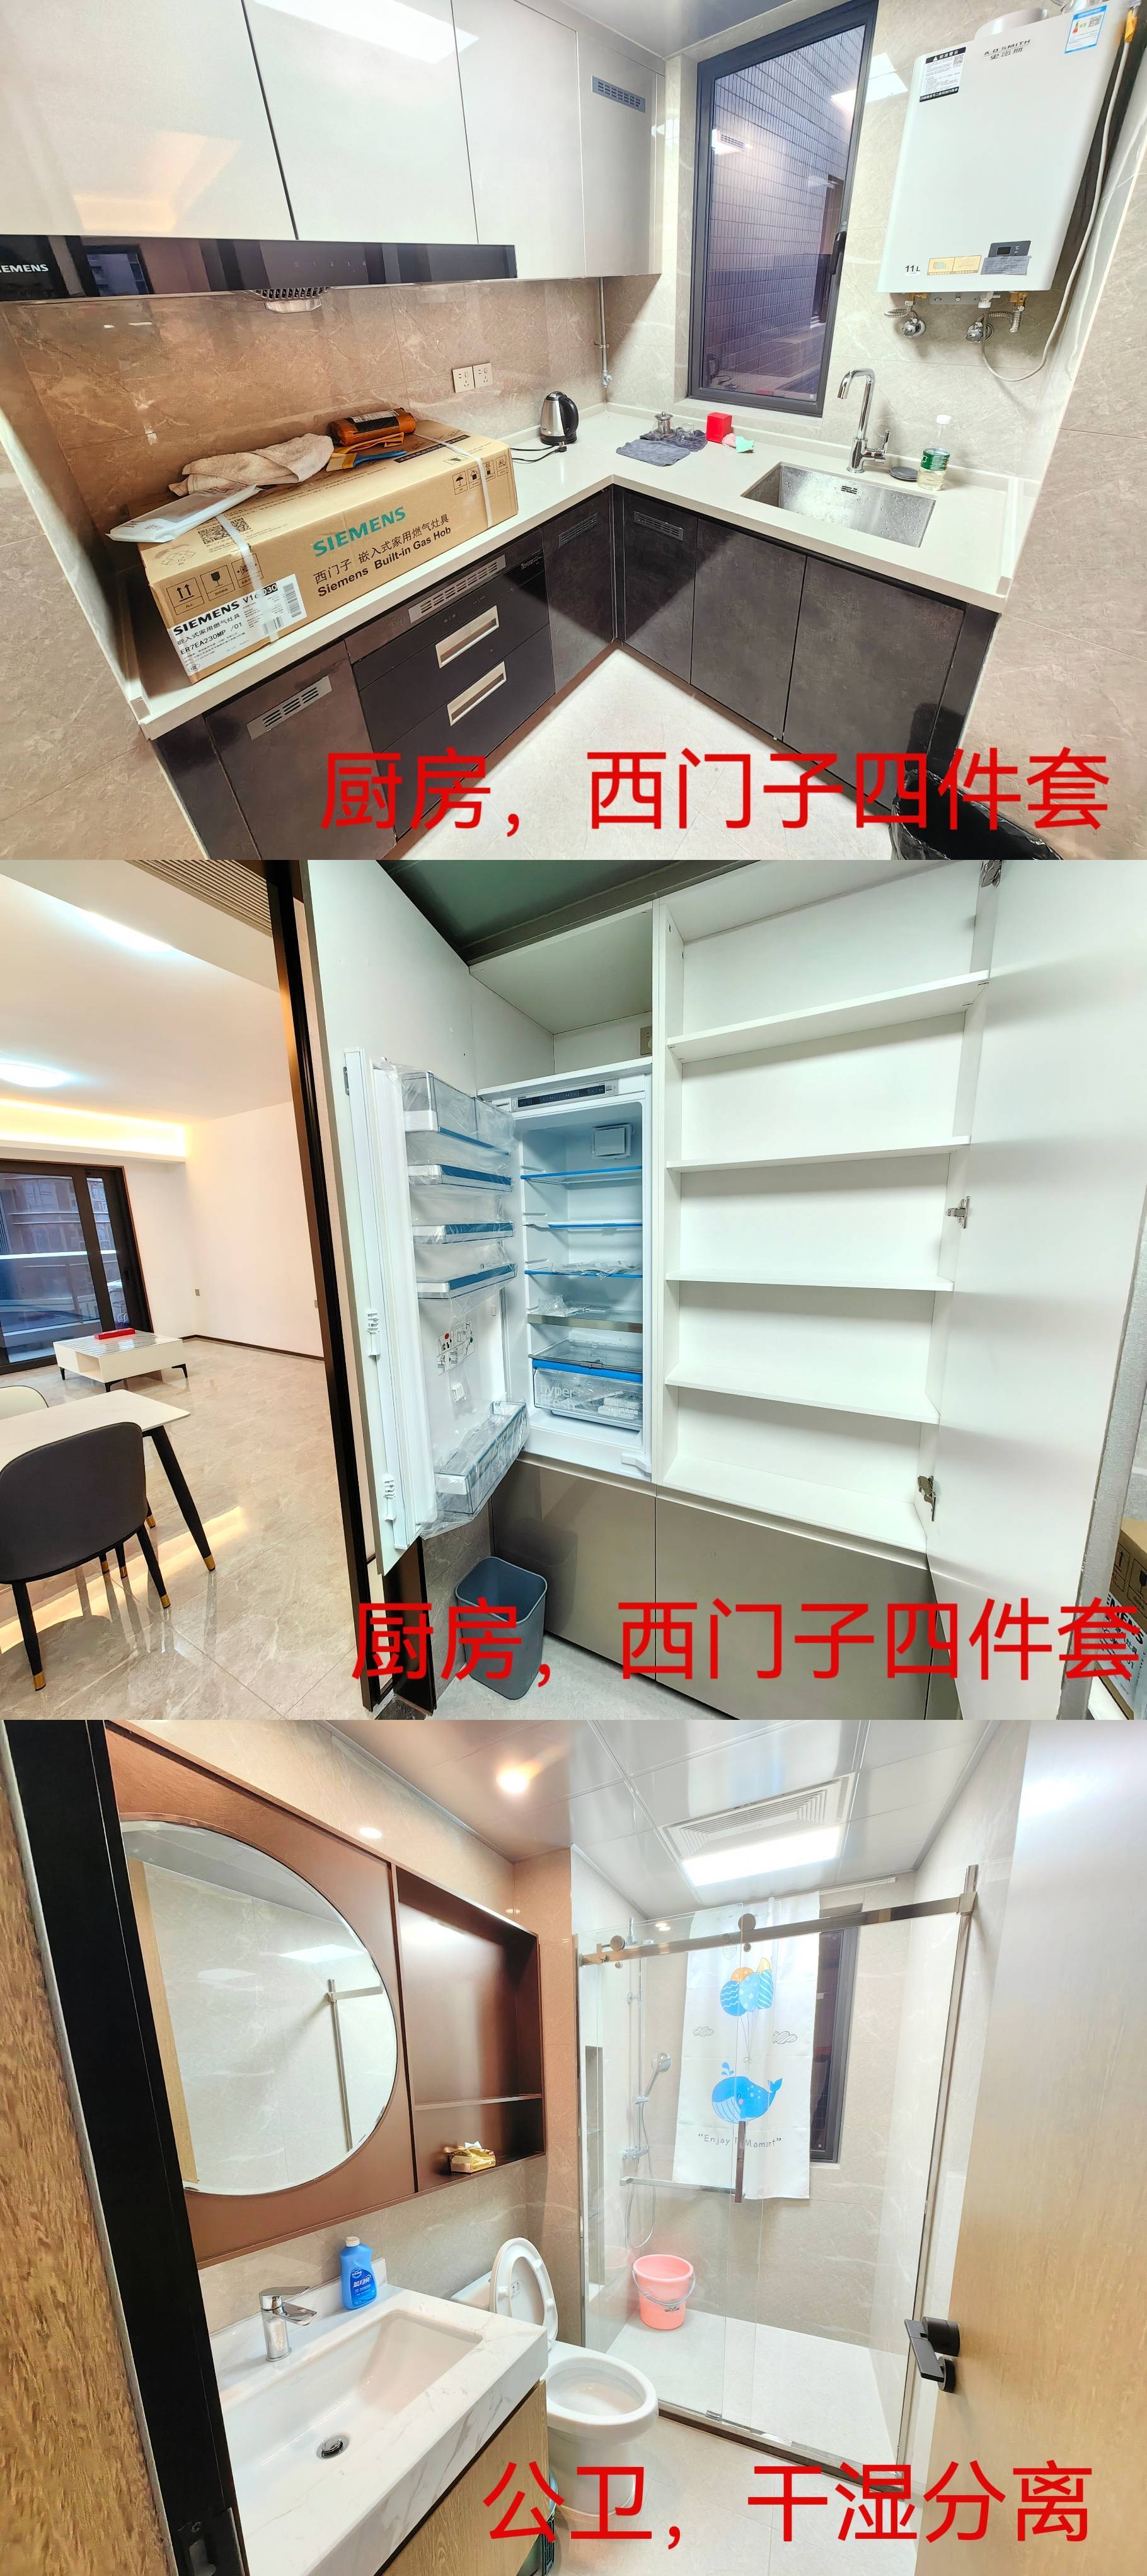 Shenzhen-Pingshan-Cozy Home,Clean&Comfy